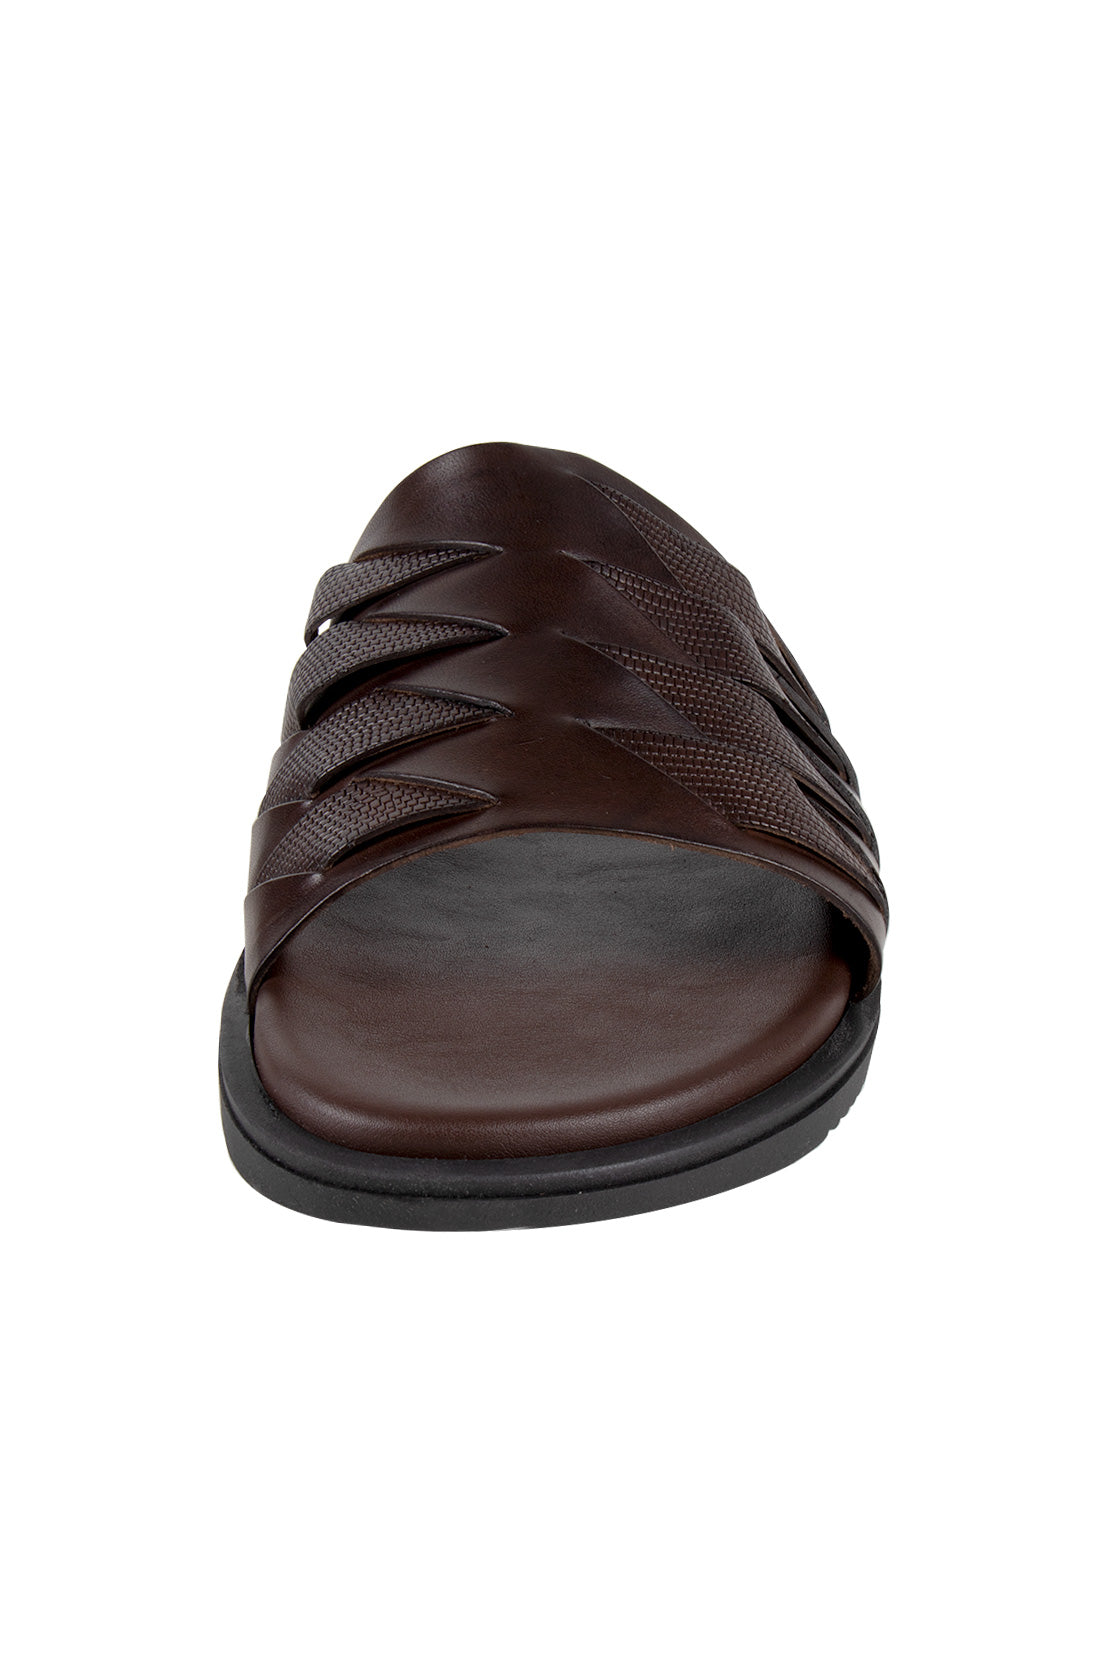 The Sandal Factory Leather Sandals Brown